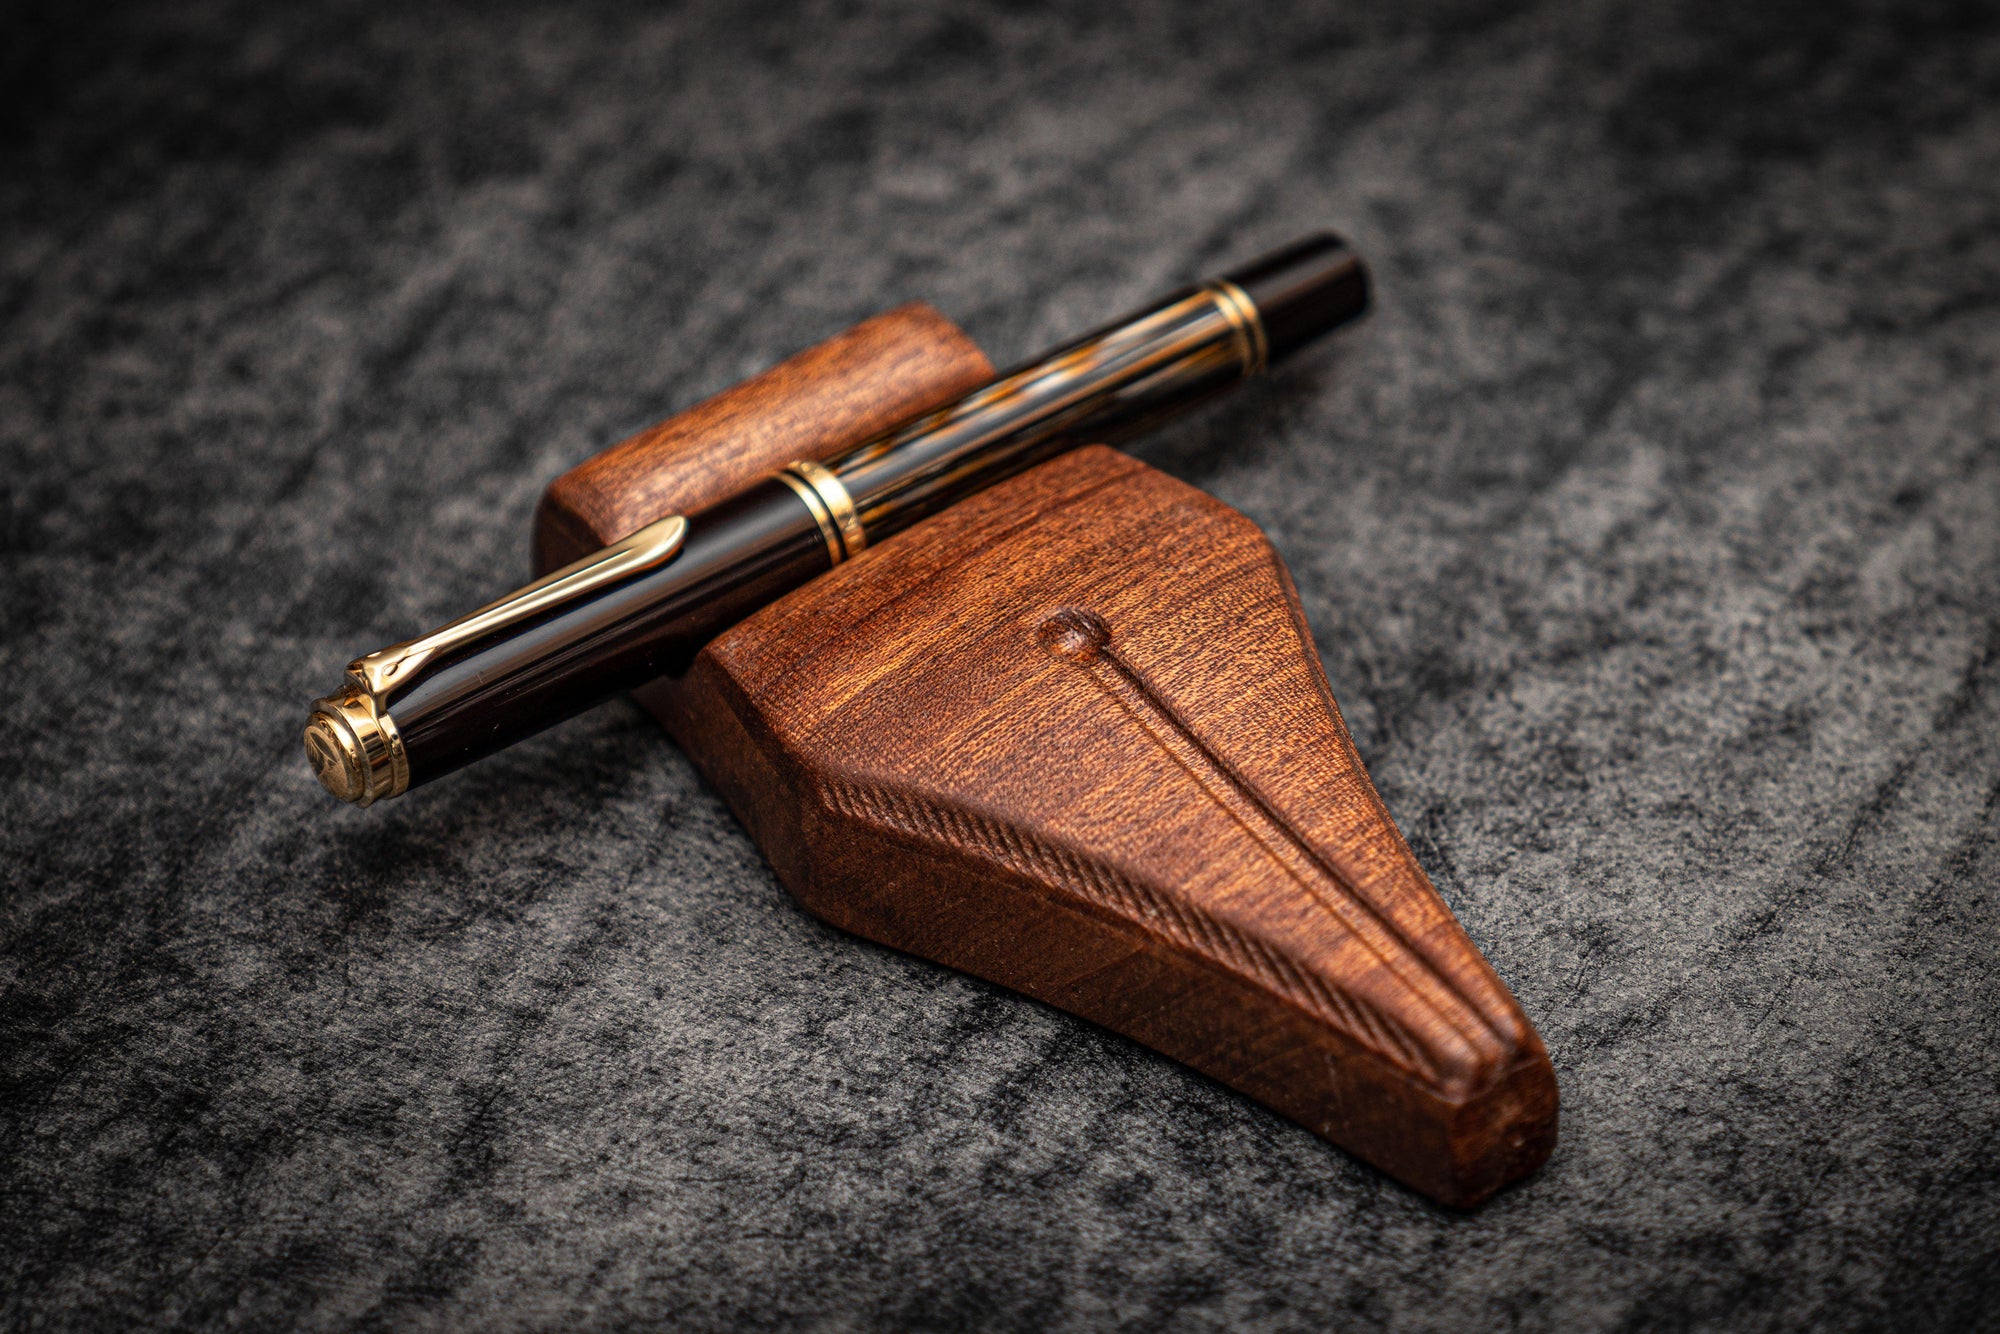 The Pen Rest' - A Mahogany Wood Pen & Brush Stand